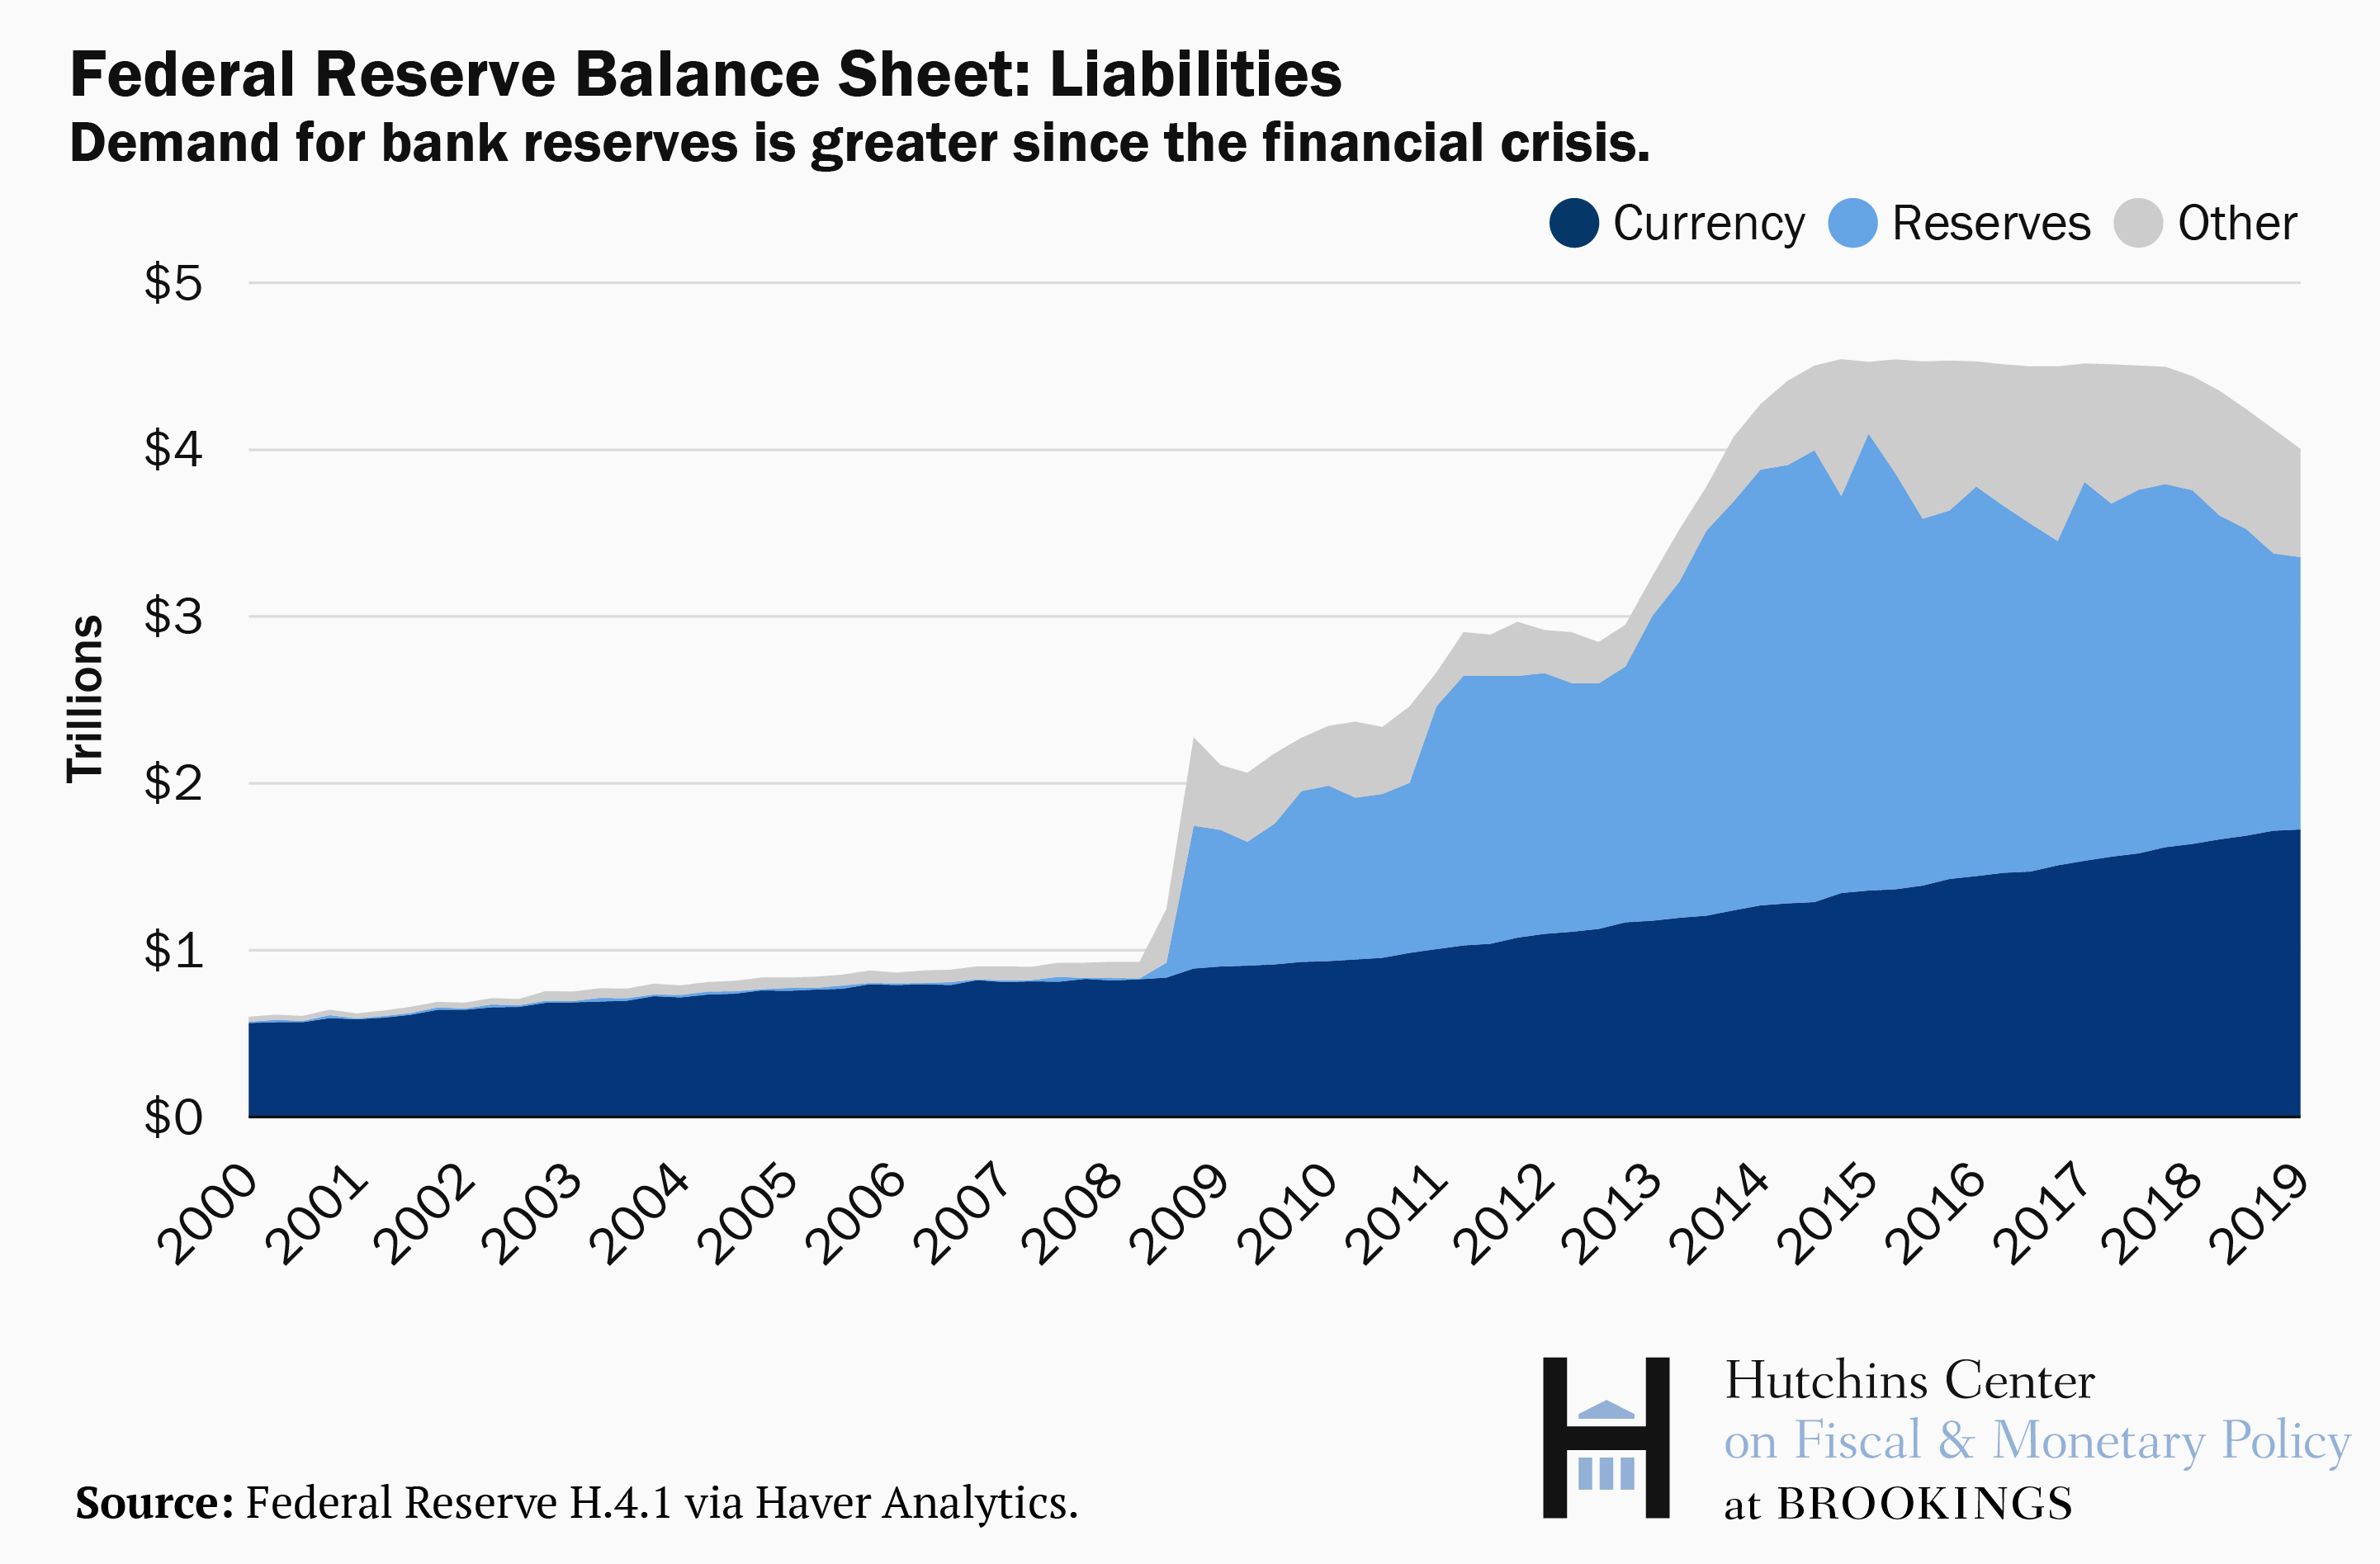 The Fed's bigger balance sheet in an era of “ample reserves”